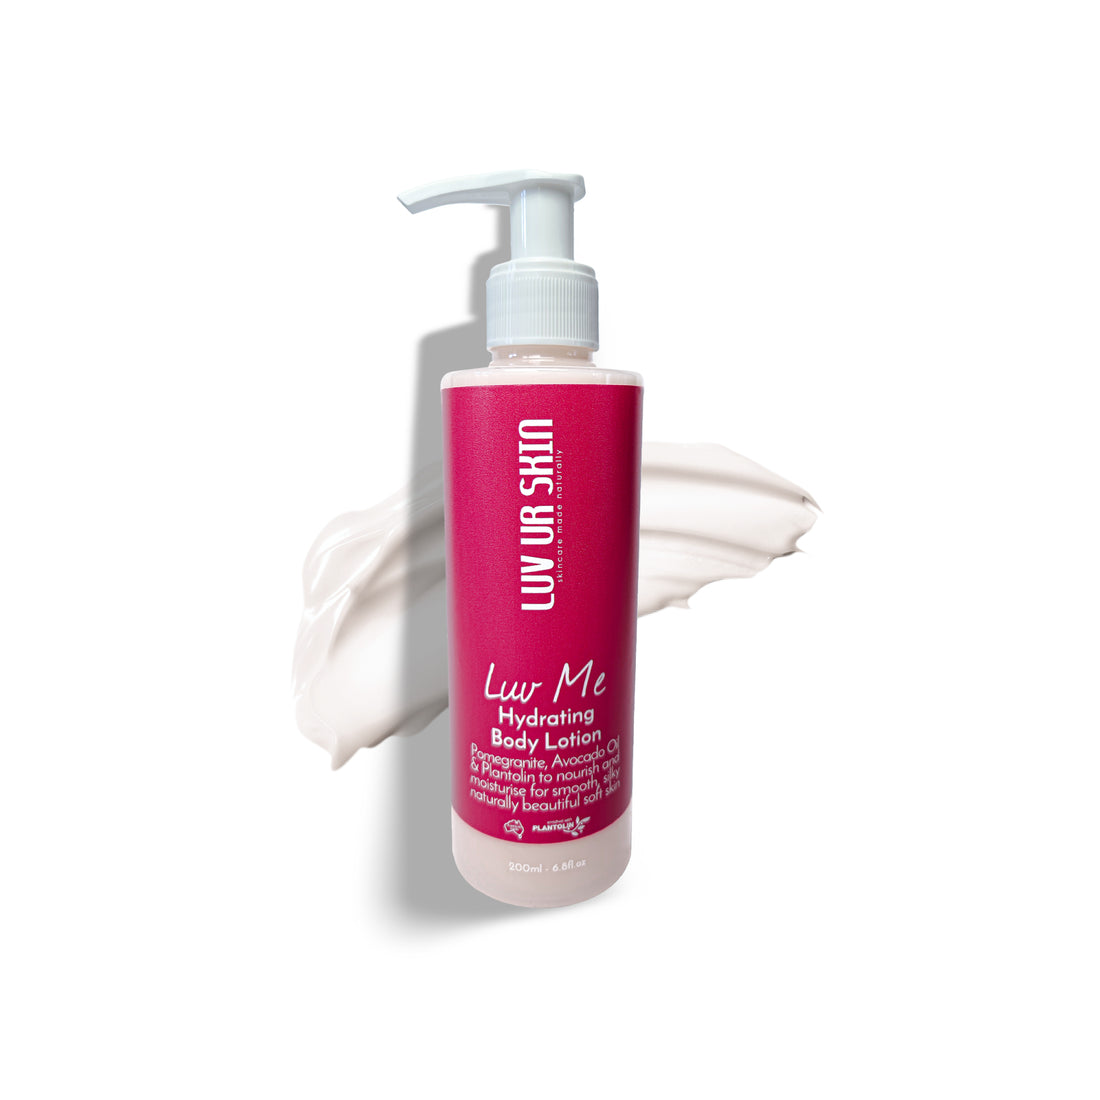 Luv Me - Hydrating Body Lotion